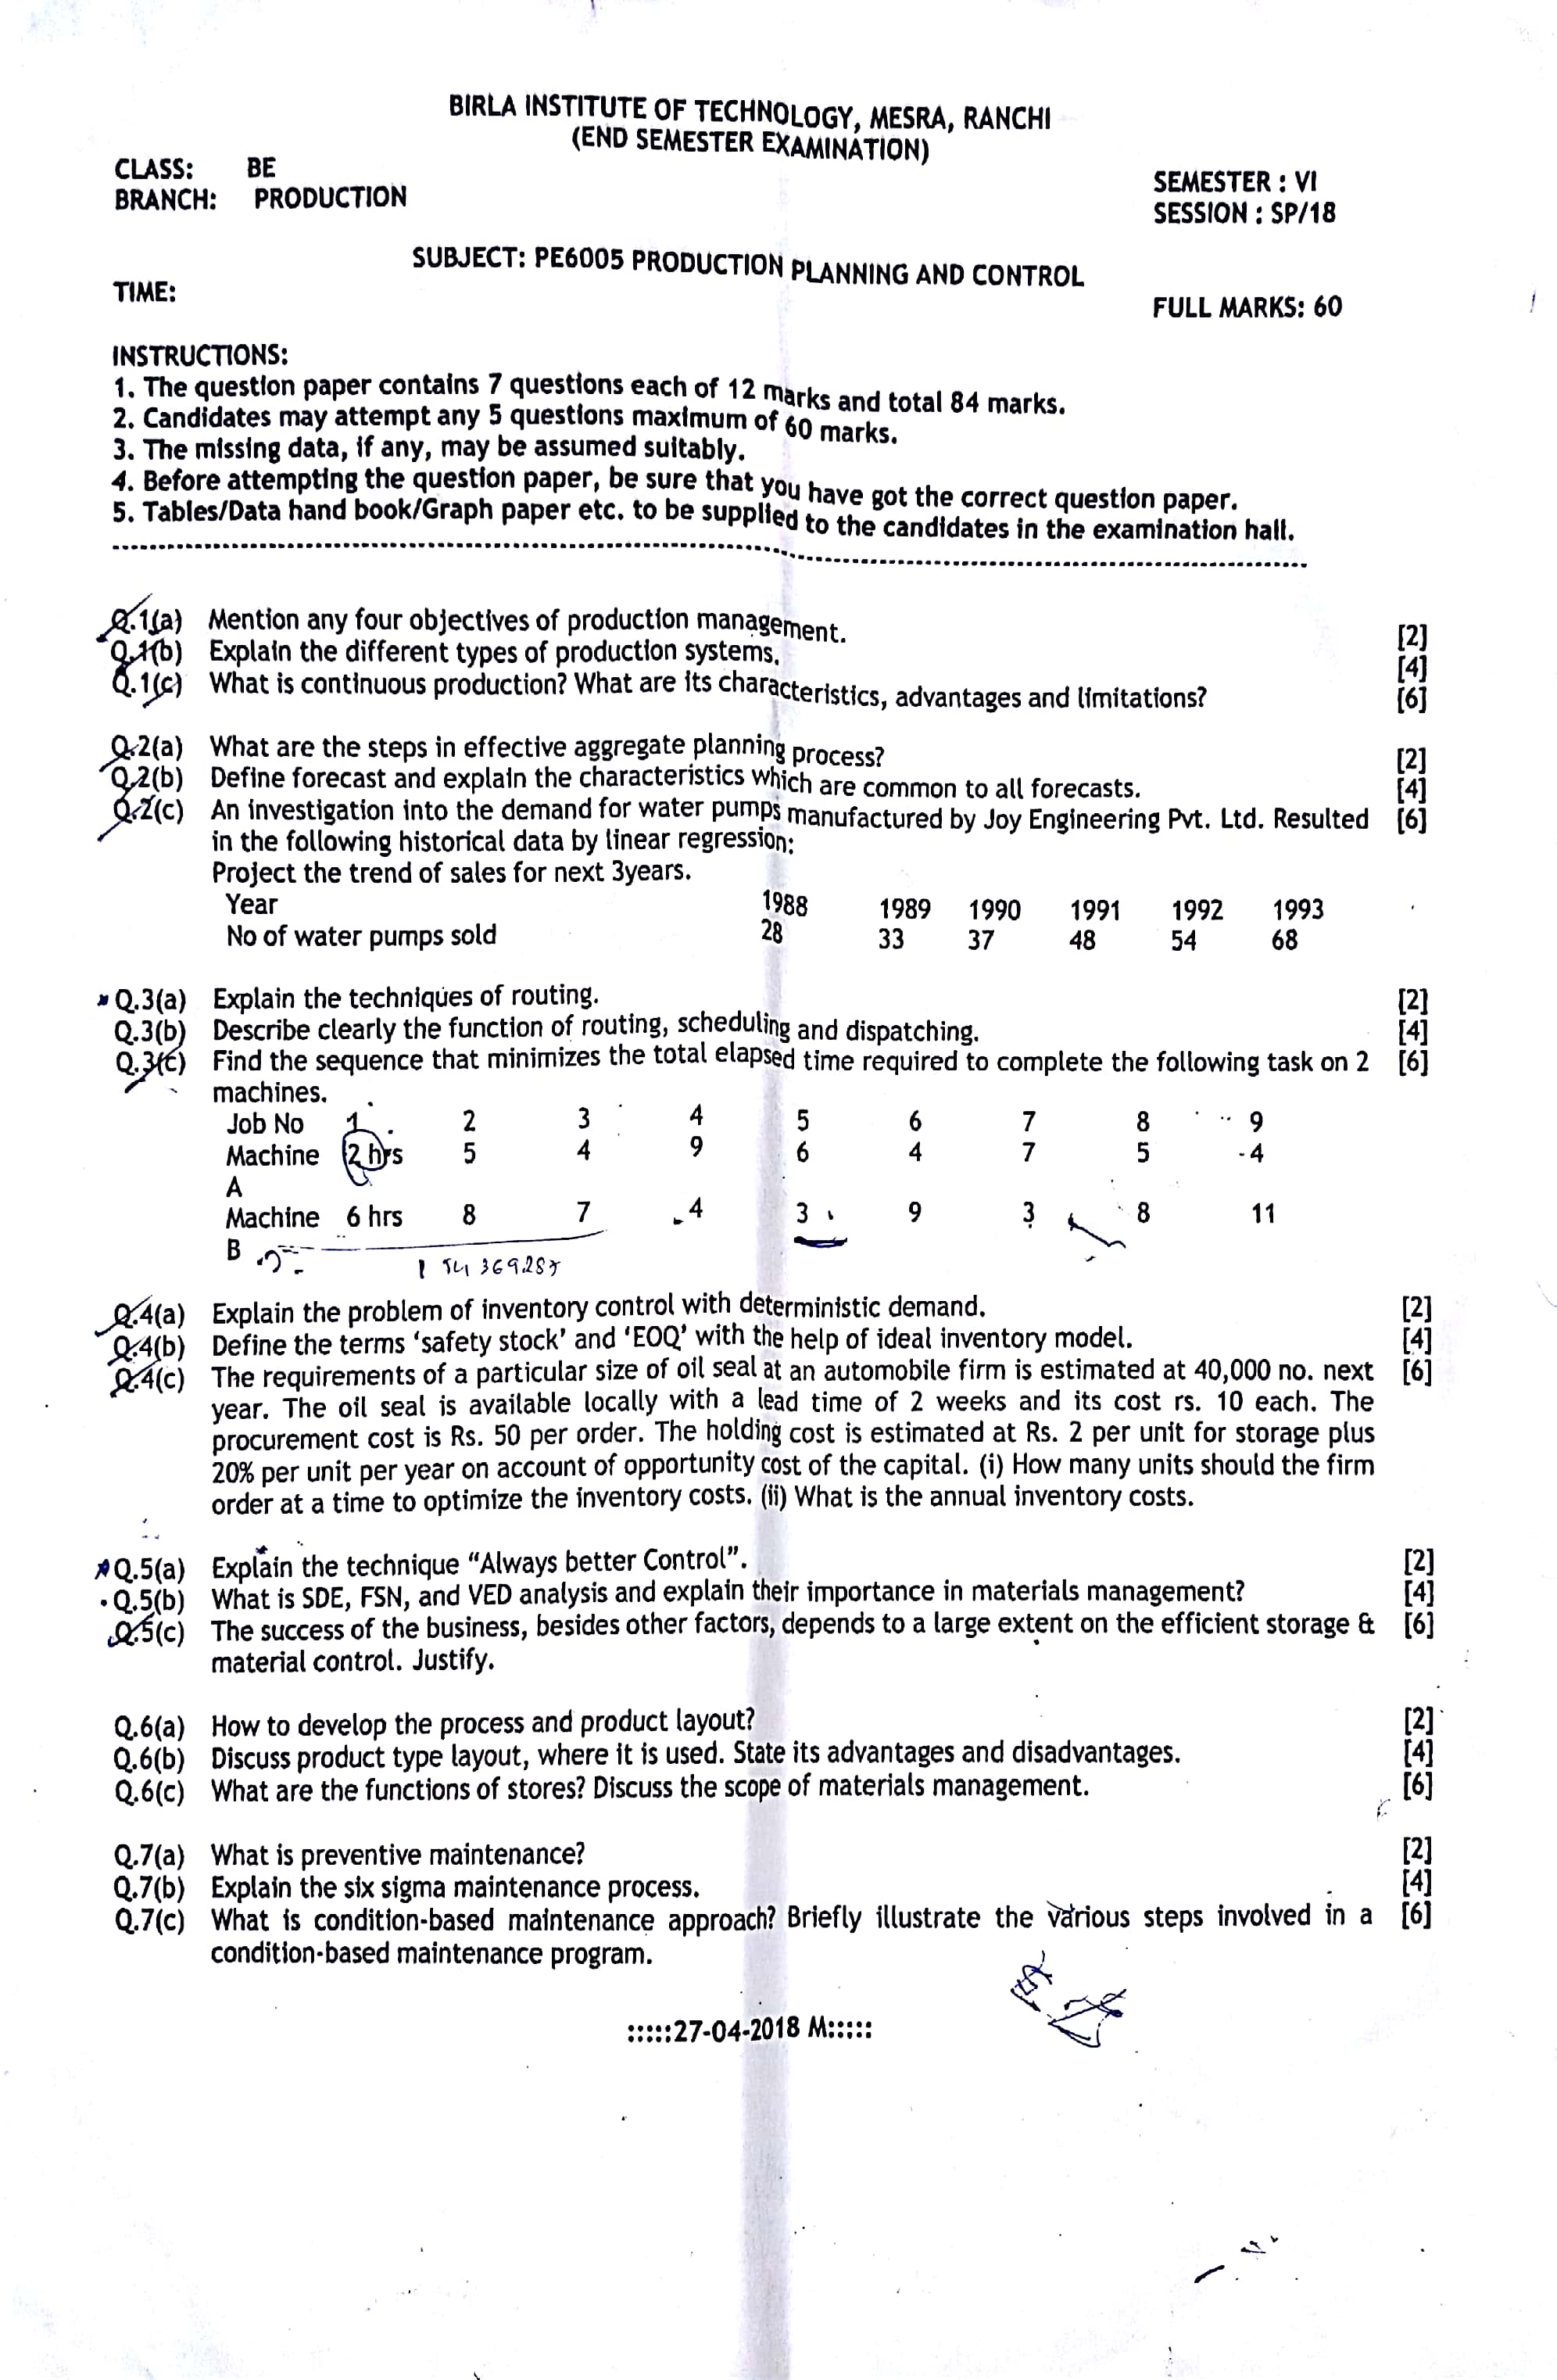 Production Planning and Control Question Paper-2494_oobHeb.jpg